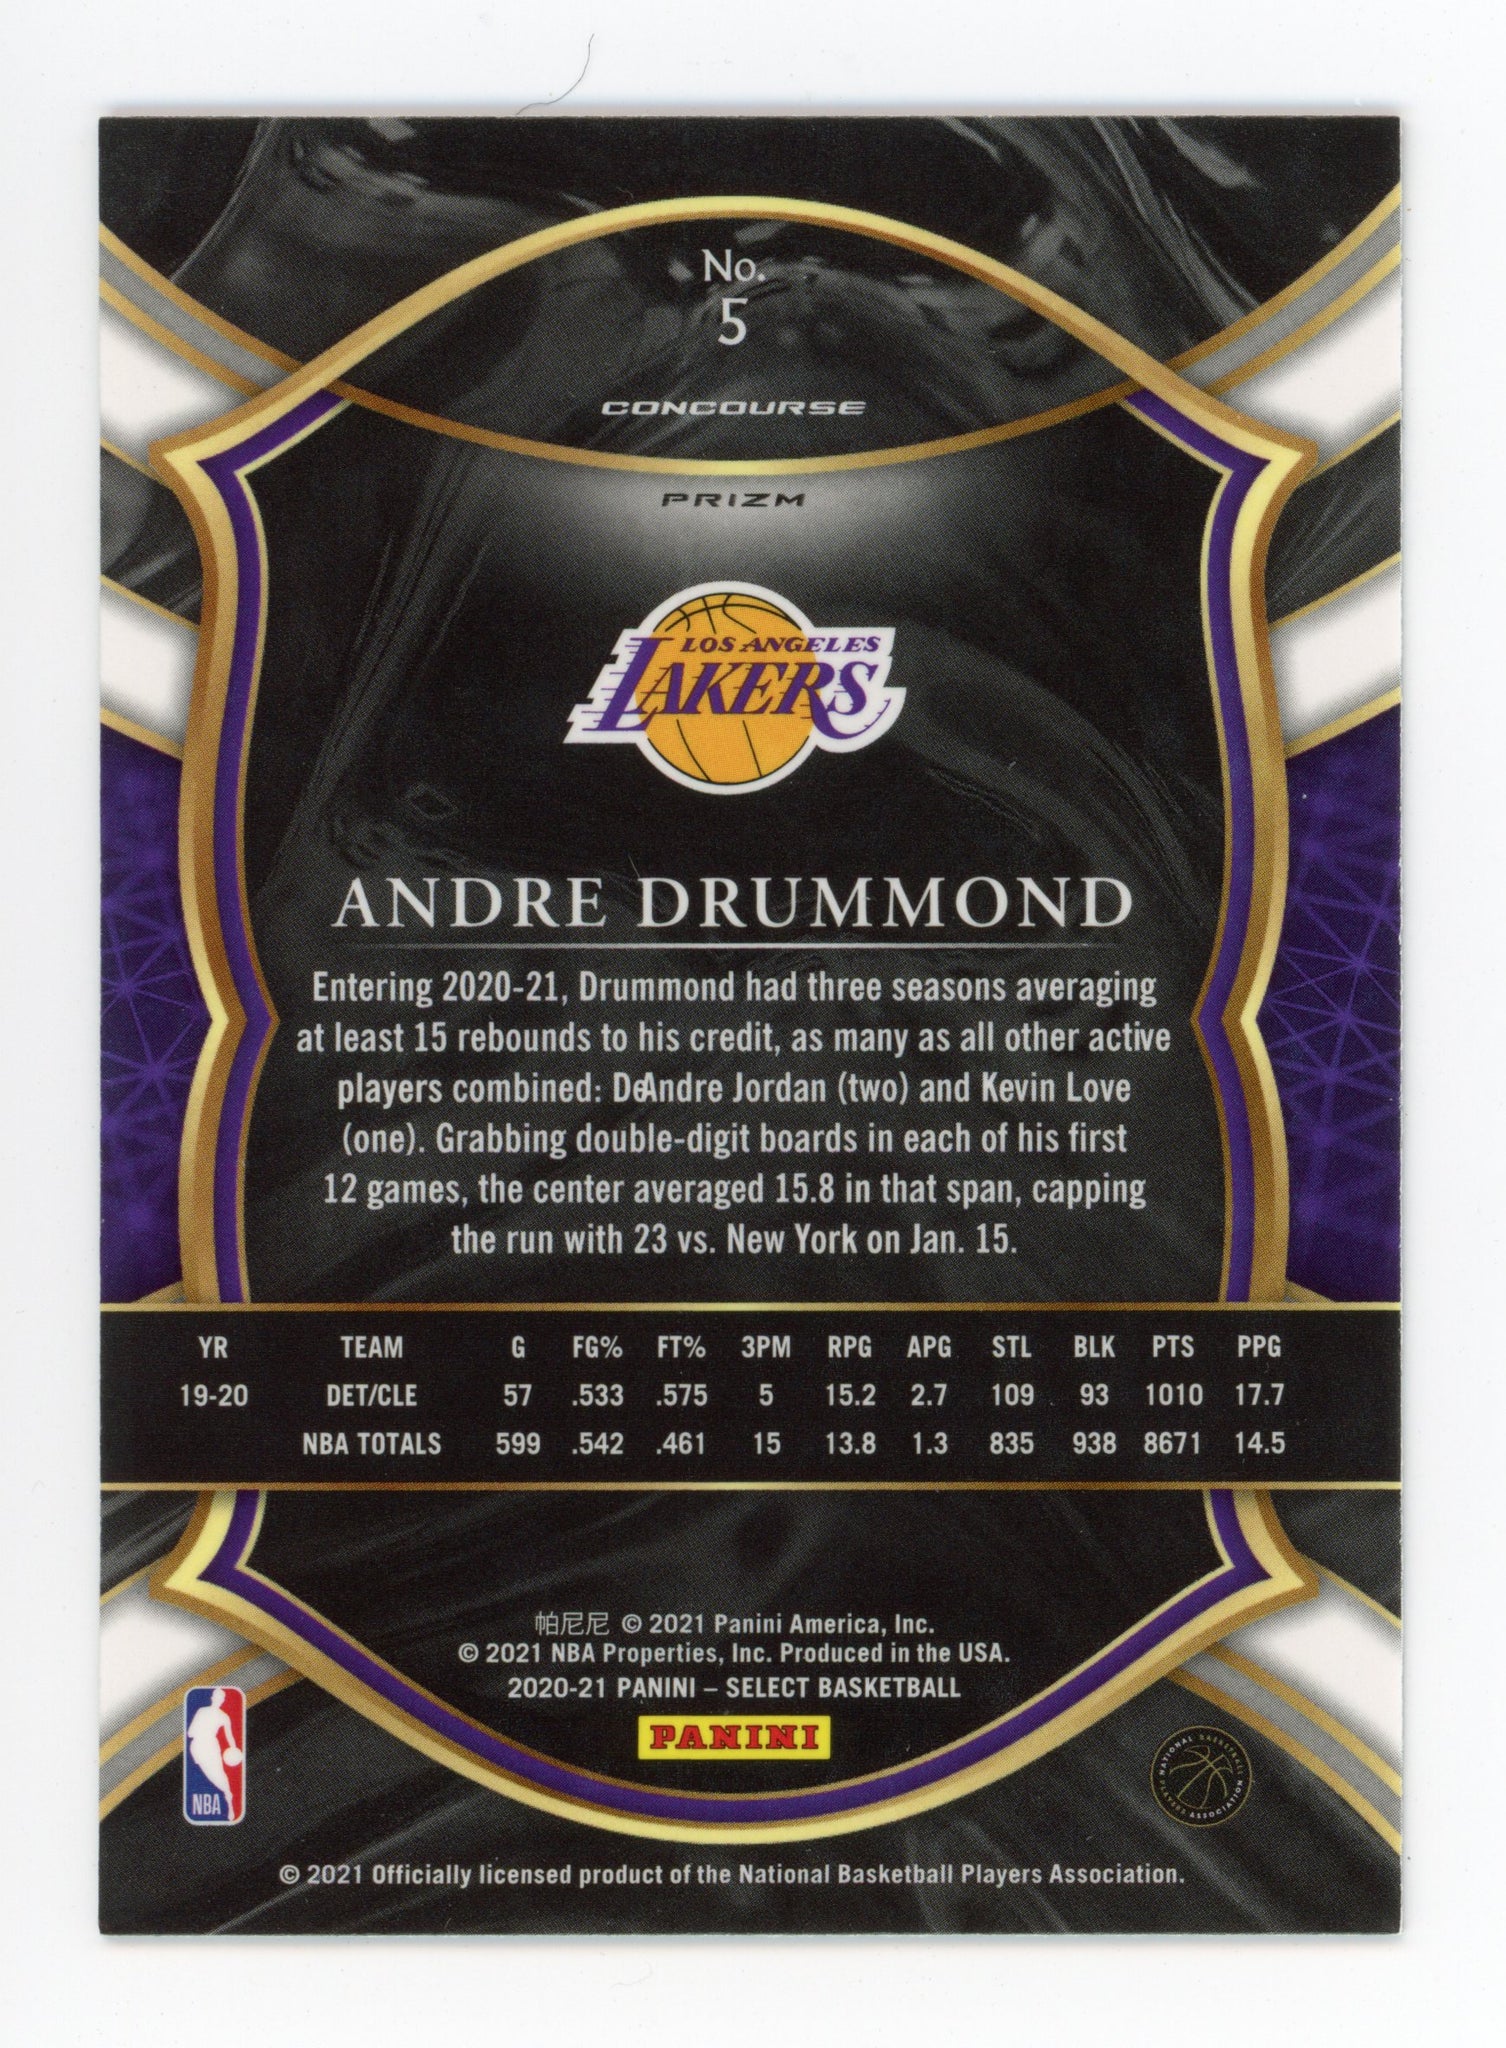 2020-2021 Andre Drummond Concourse Prizm Los Angeles Lakers # 5